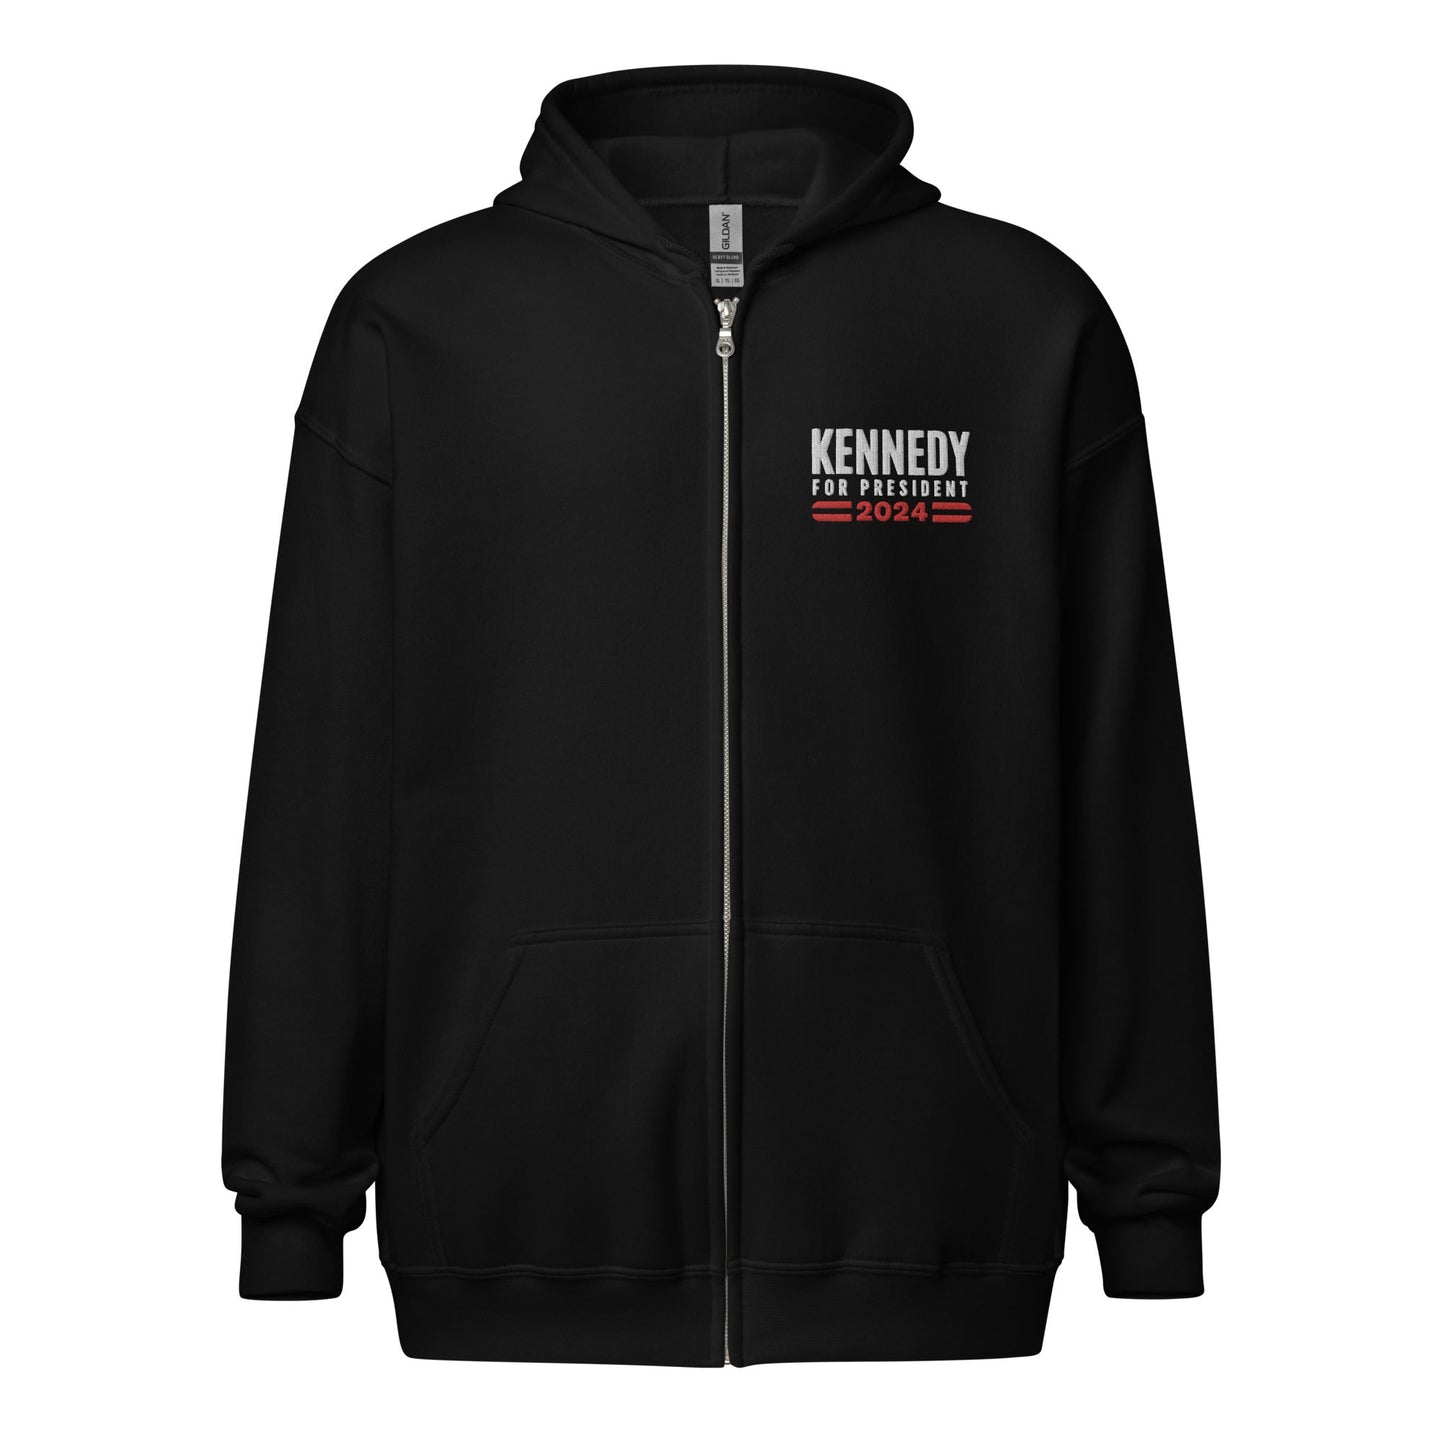 Who is RFK Jr? Embroidered Unisex Zip Hoodie - TEAM KENNEDY. All rights reserved